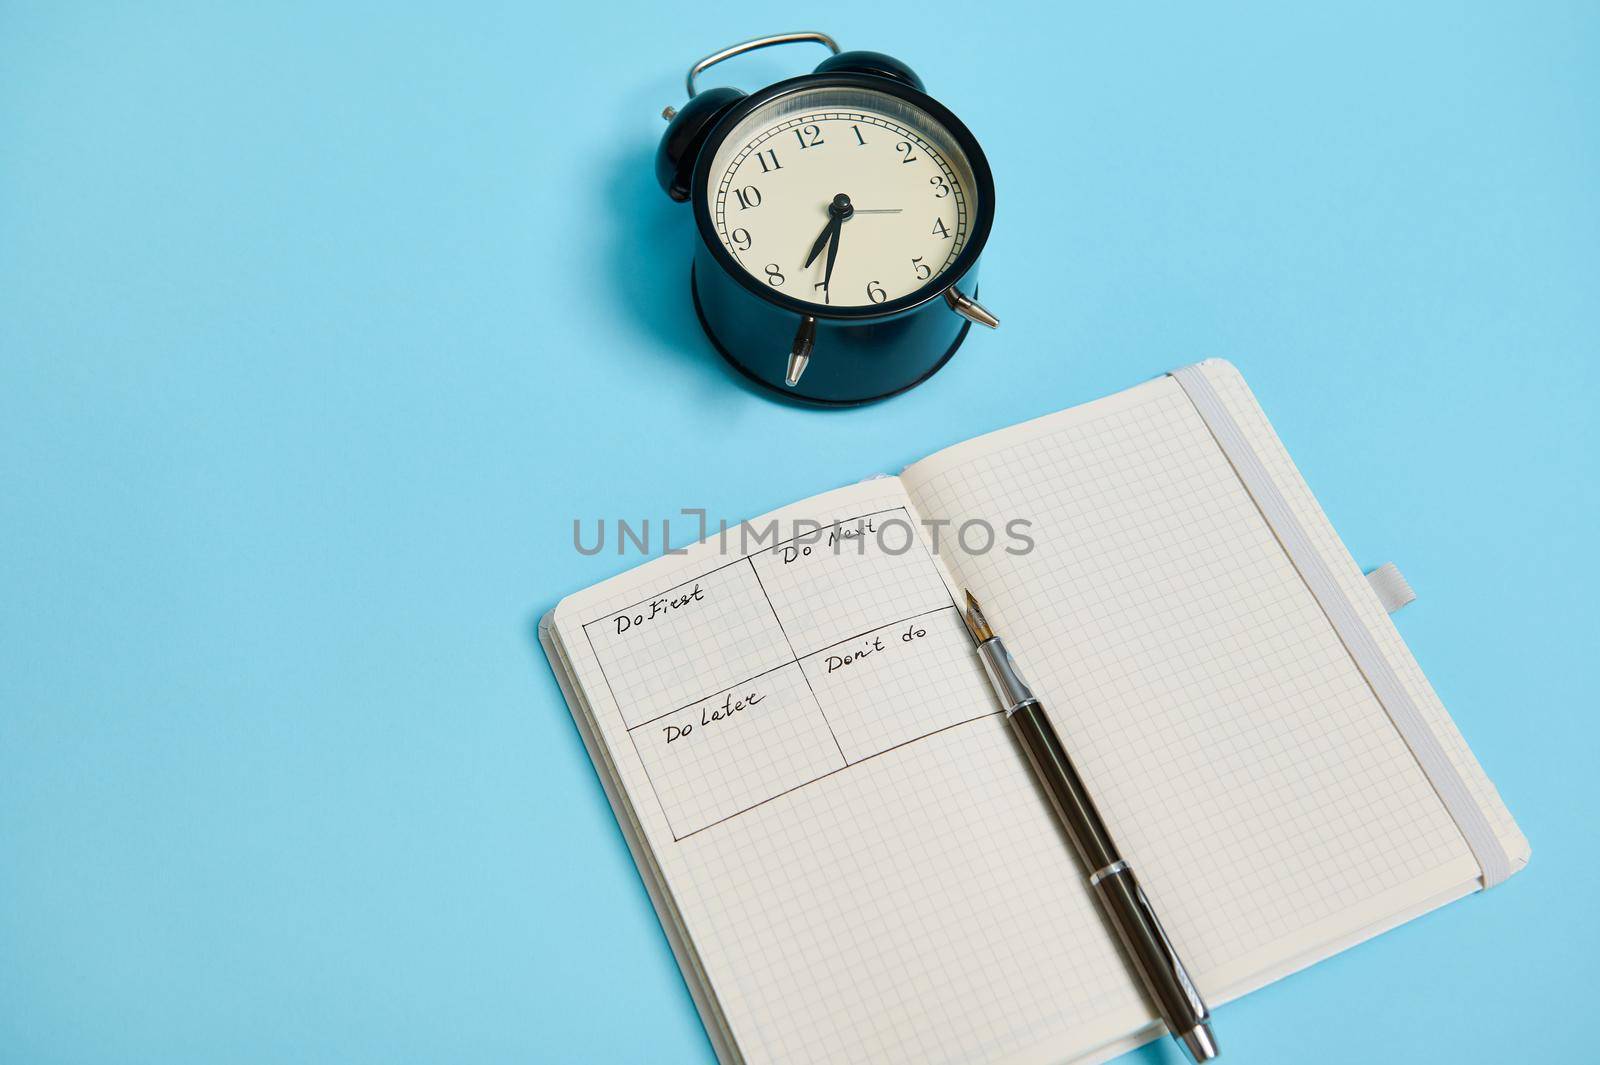 An open organizer notebook with timetable of the day by hour, pen, alarm clock on colored background with copy space. Time management, deadline and concept of proper planning and organization of time